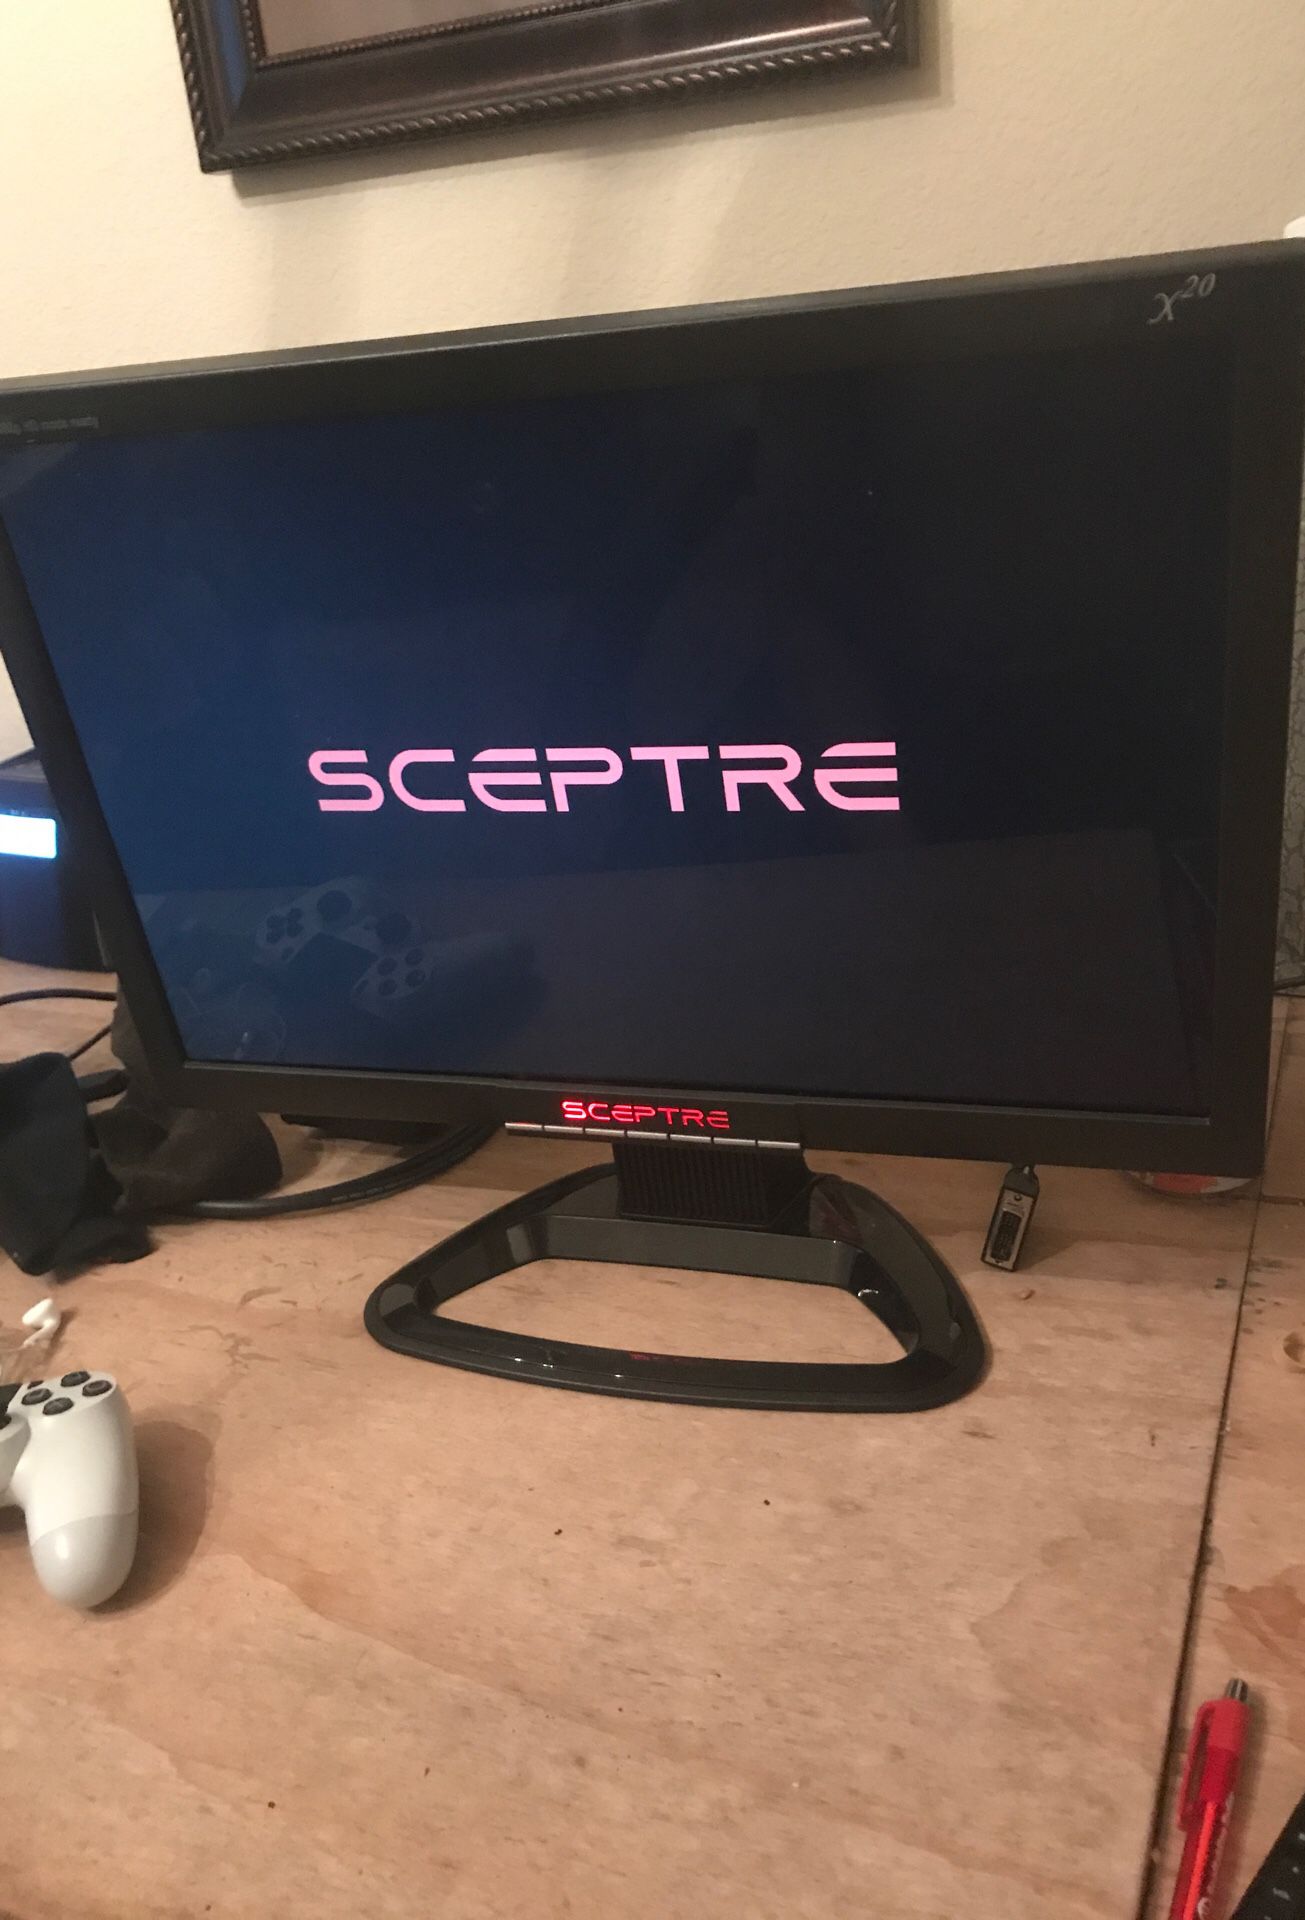 Sceptre monitor (great for gaming) or normal use